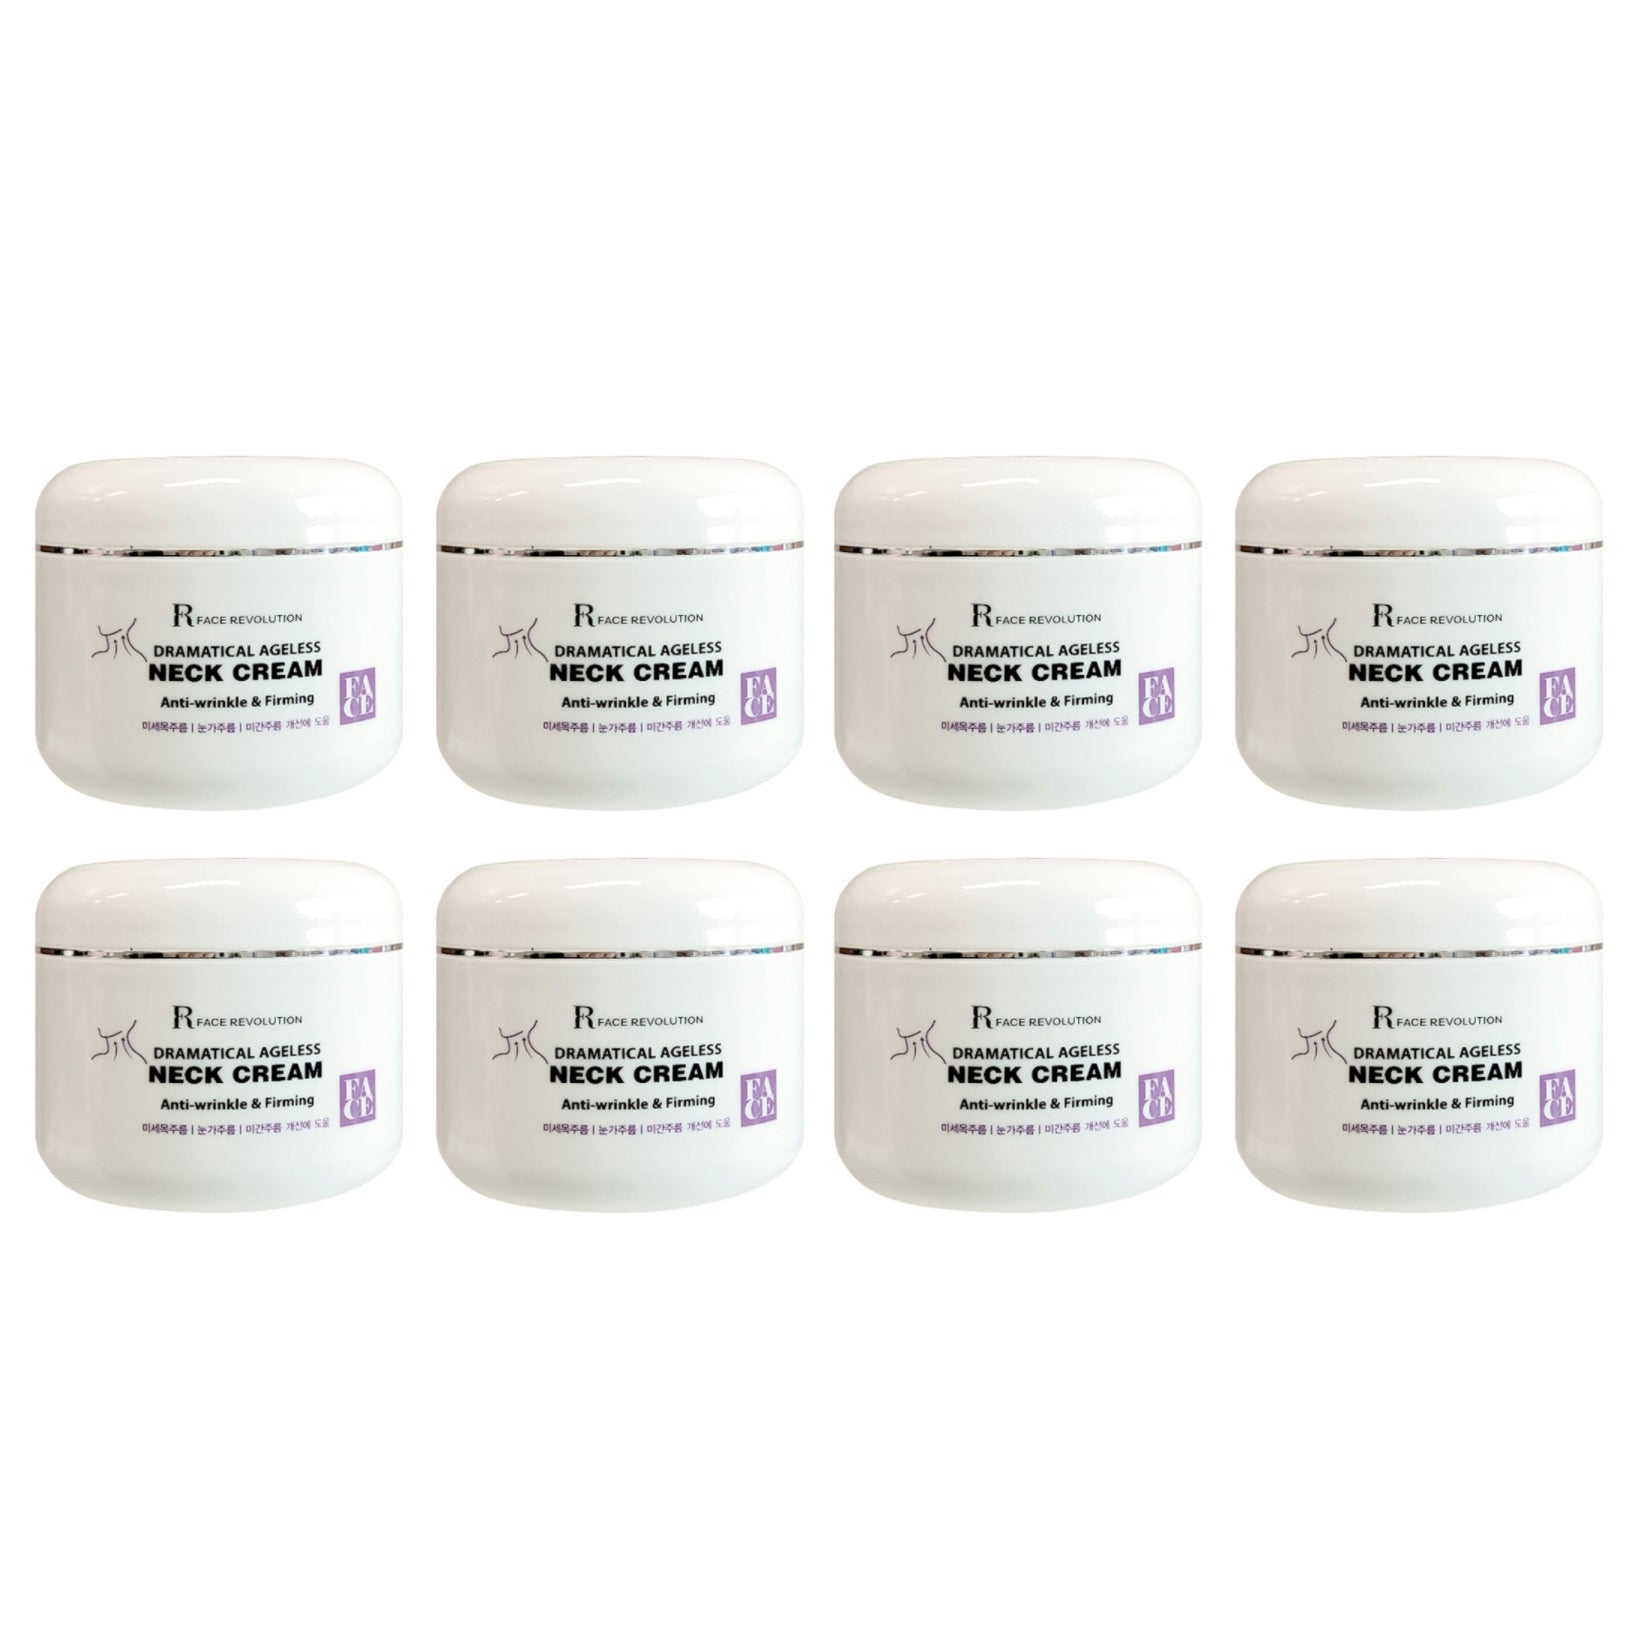 8 Pieces FACE REVOLUTION Dramatical Ageless Neck Creams 100g Wrinkles Lines Moisture Anti-ageing